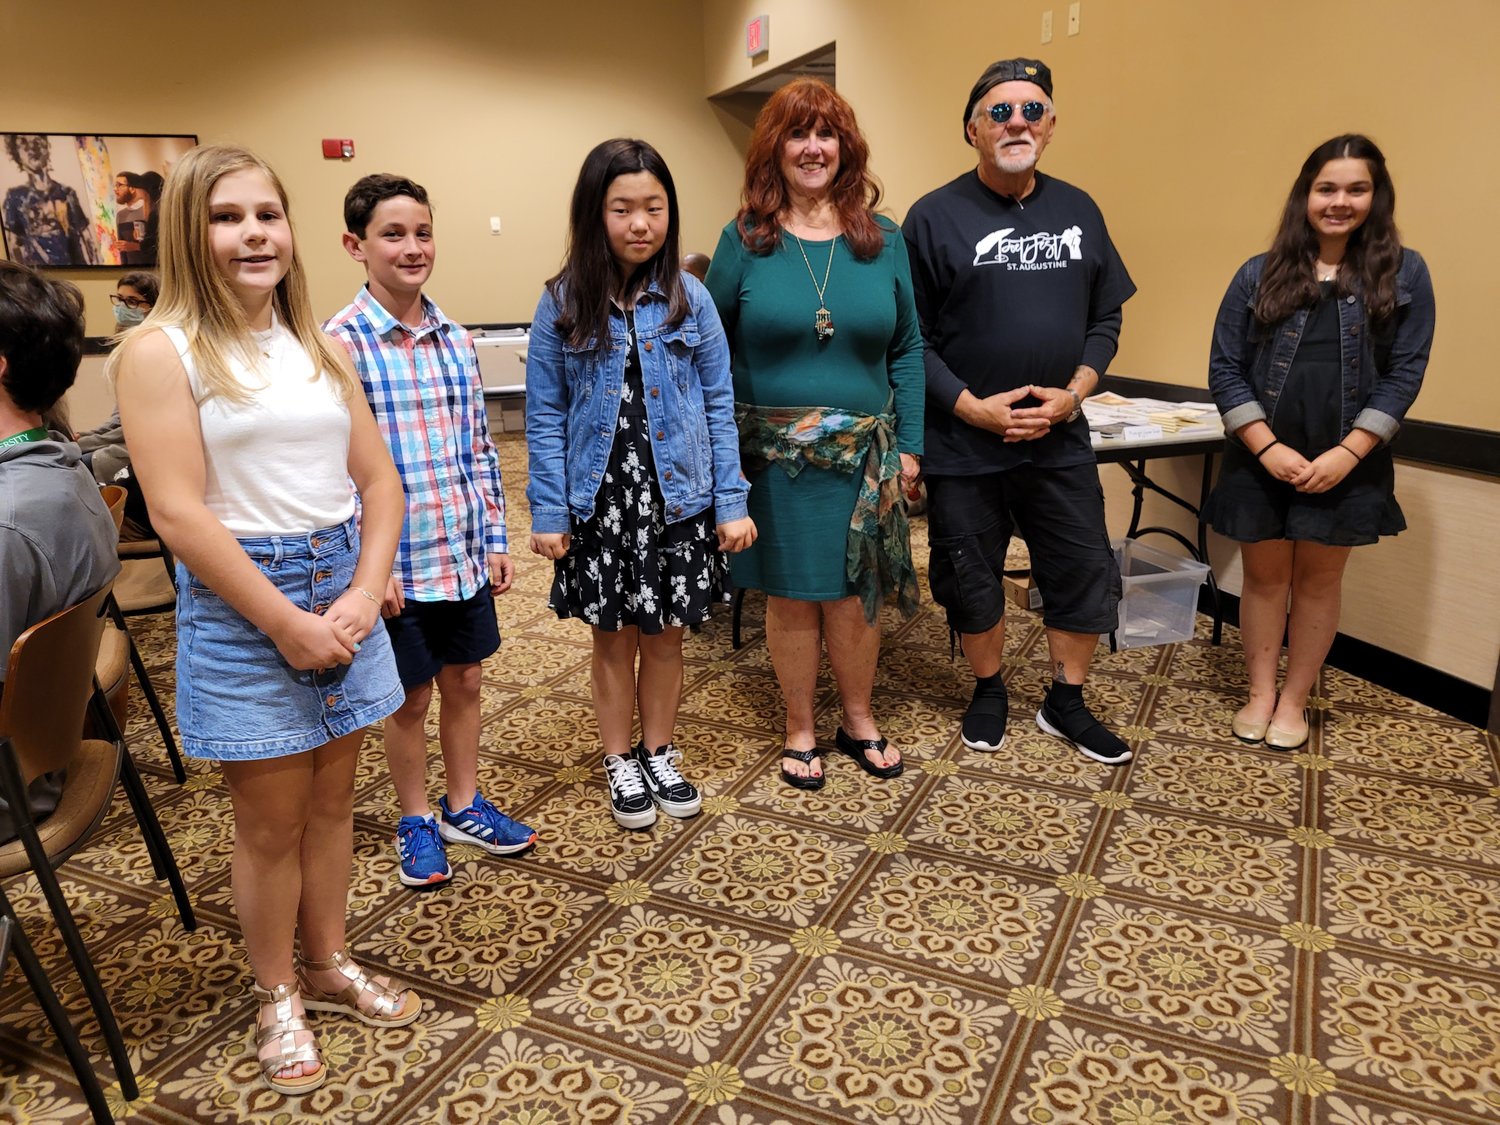 Some winners in The St. Johns Cultural Council’s second annual Haiku Contest are seen with judge Michael Henry Lee. Pictured from left are Ella Belknap, Easton Crews, Aika Matsuda, Pat Konover, Lee and Charlotte Garcia.